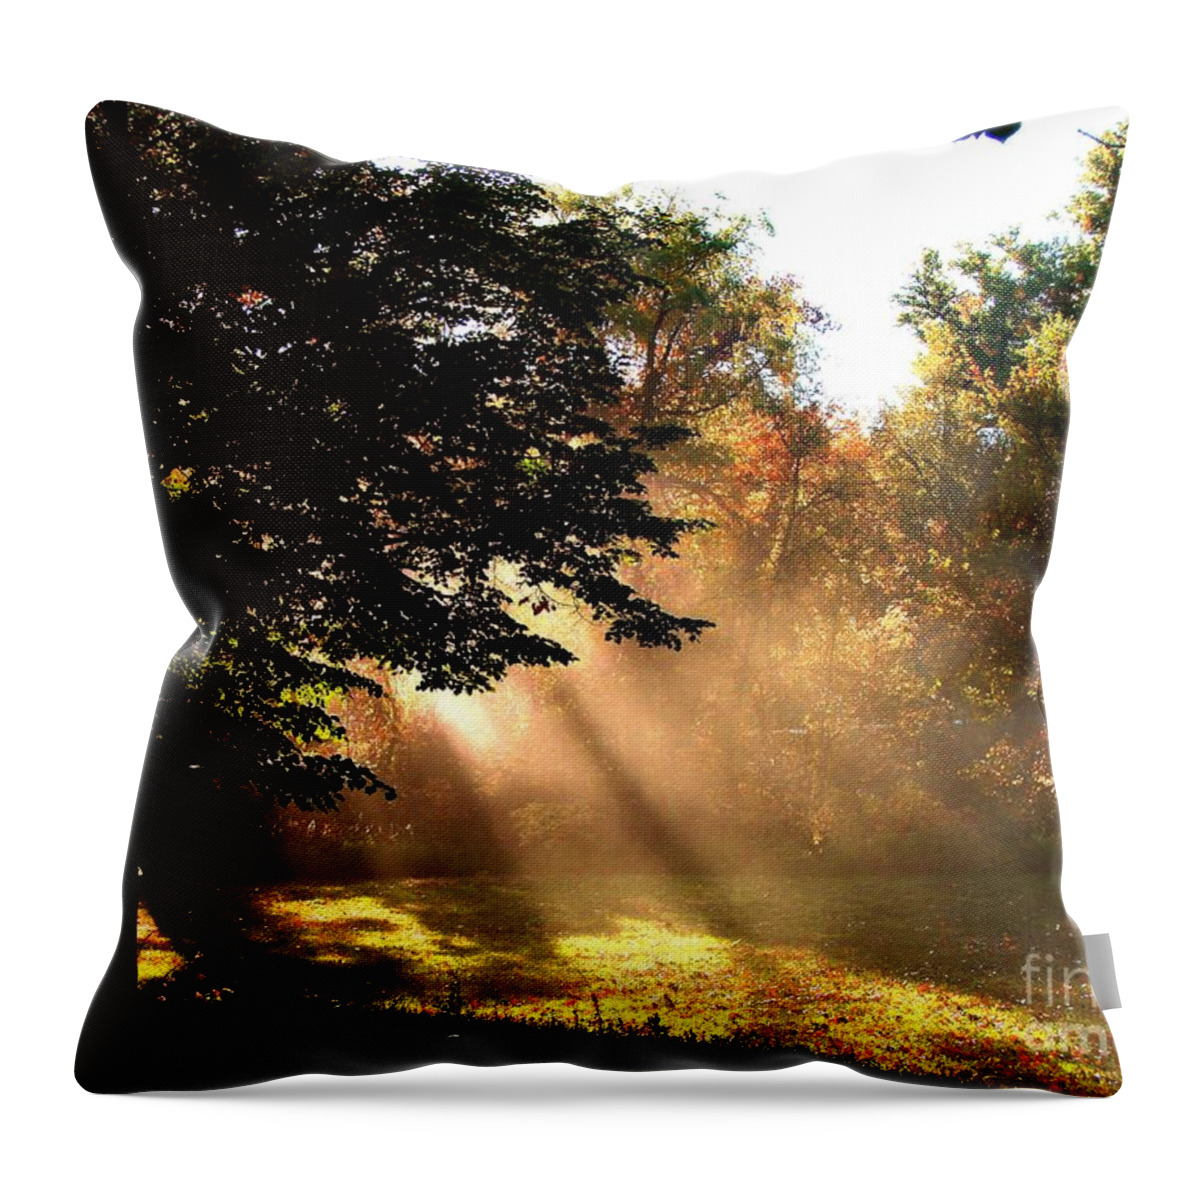 Autumn Throw Pillow featuring the photograph Morning Sunshine by Linda Cox